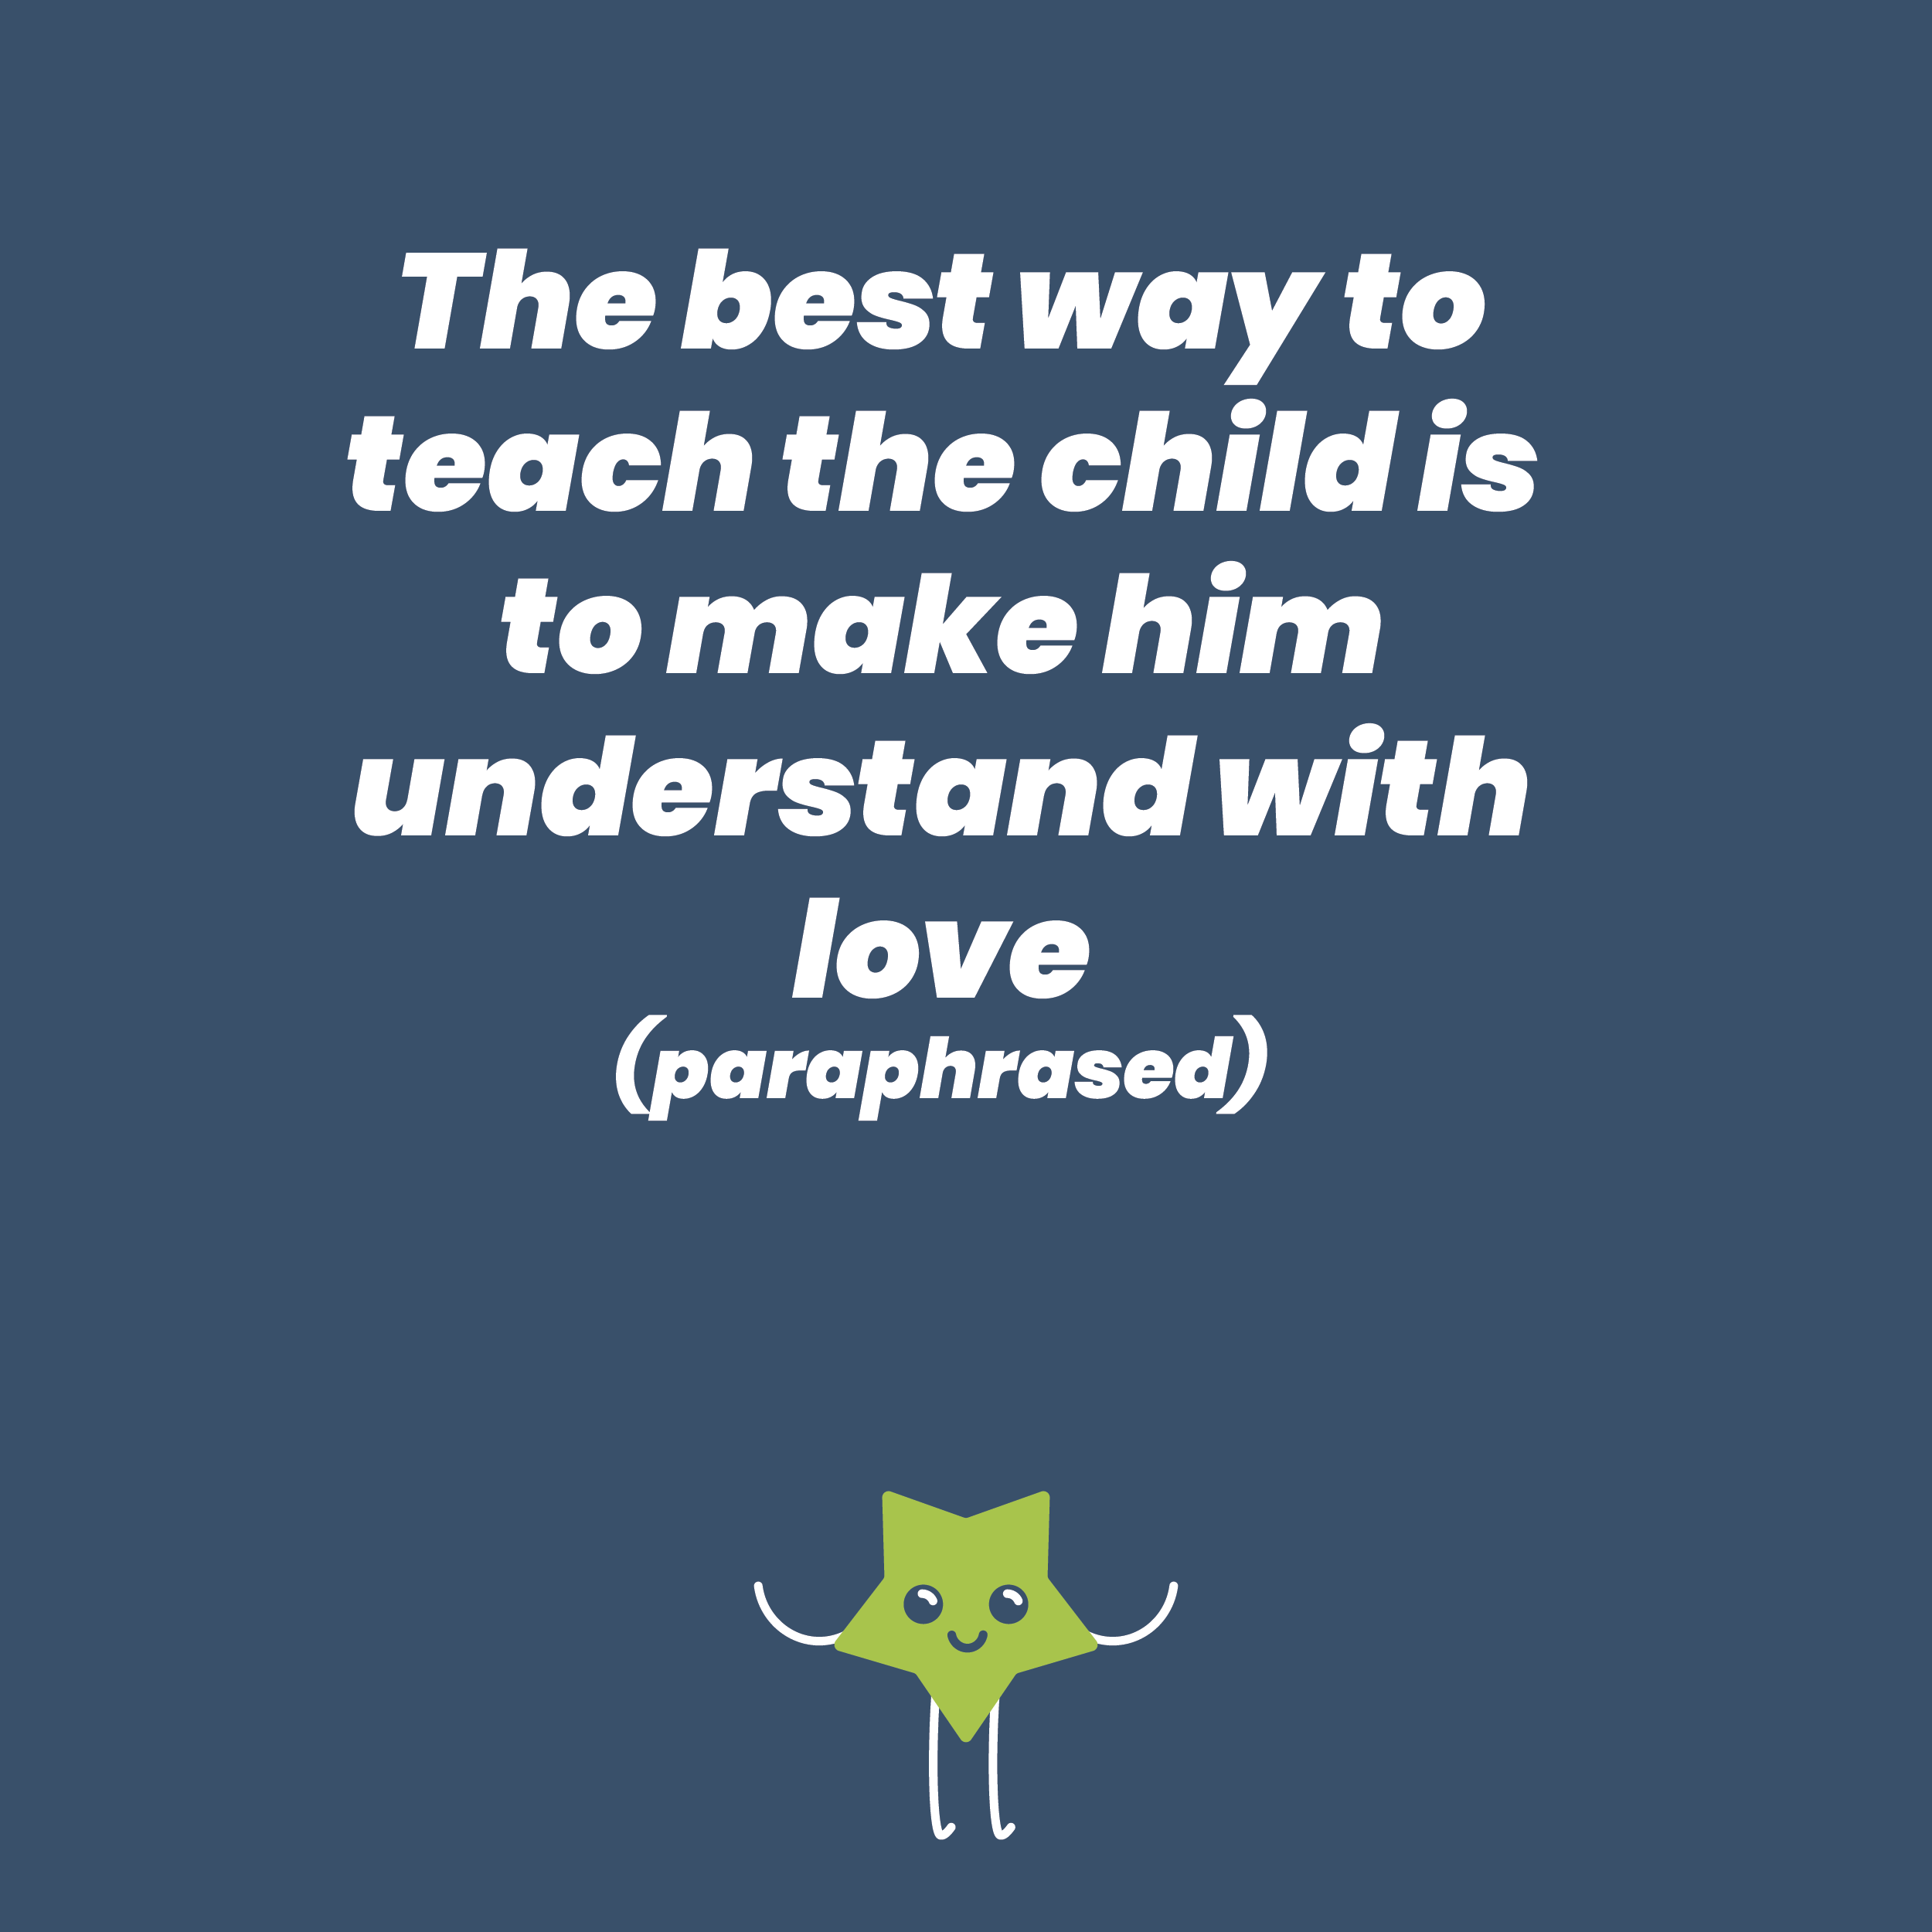 The best way to teach the child is to make him understand with love (paraphrased)